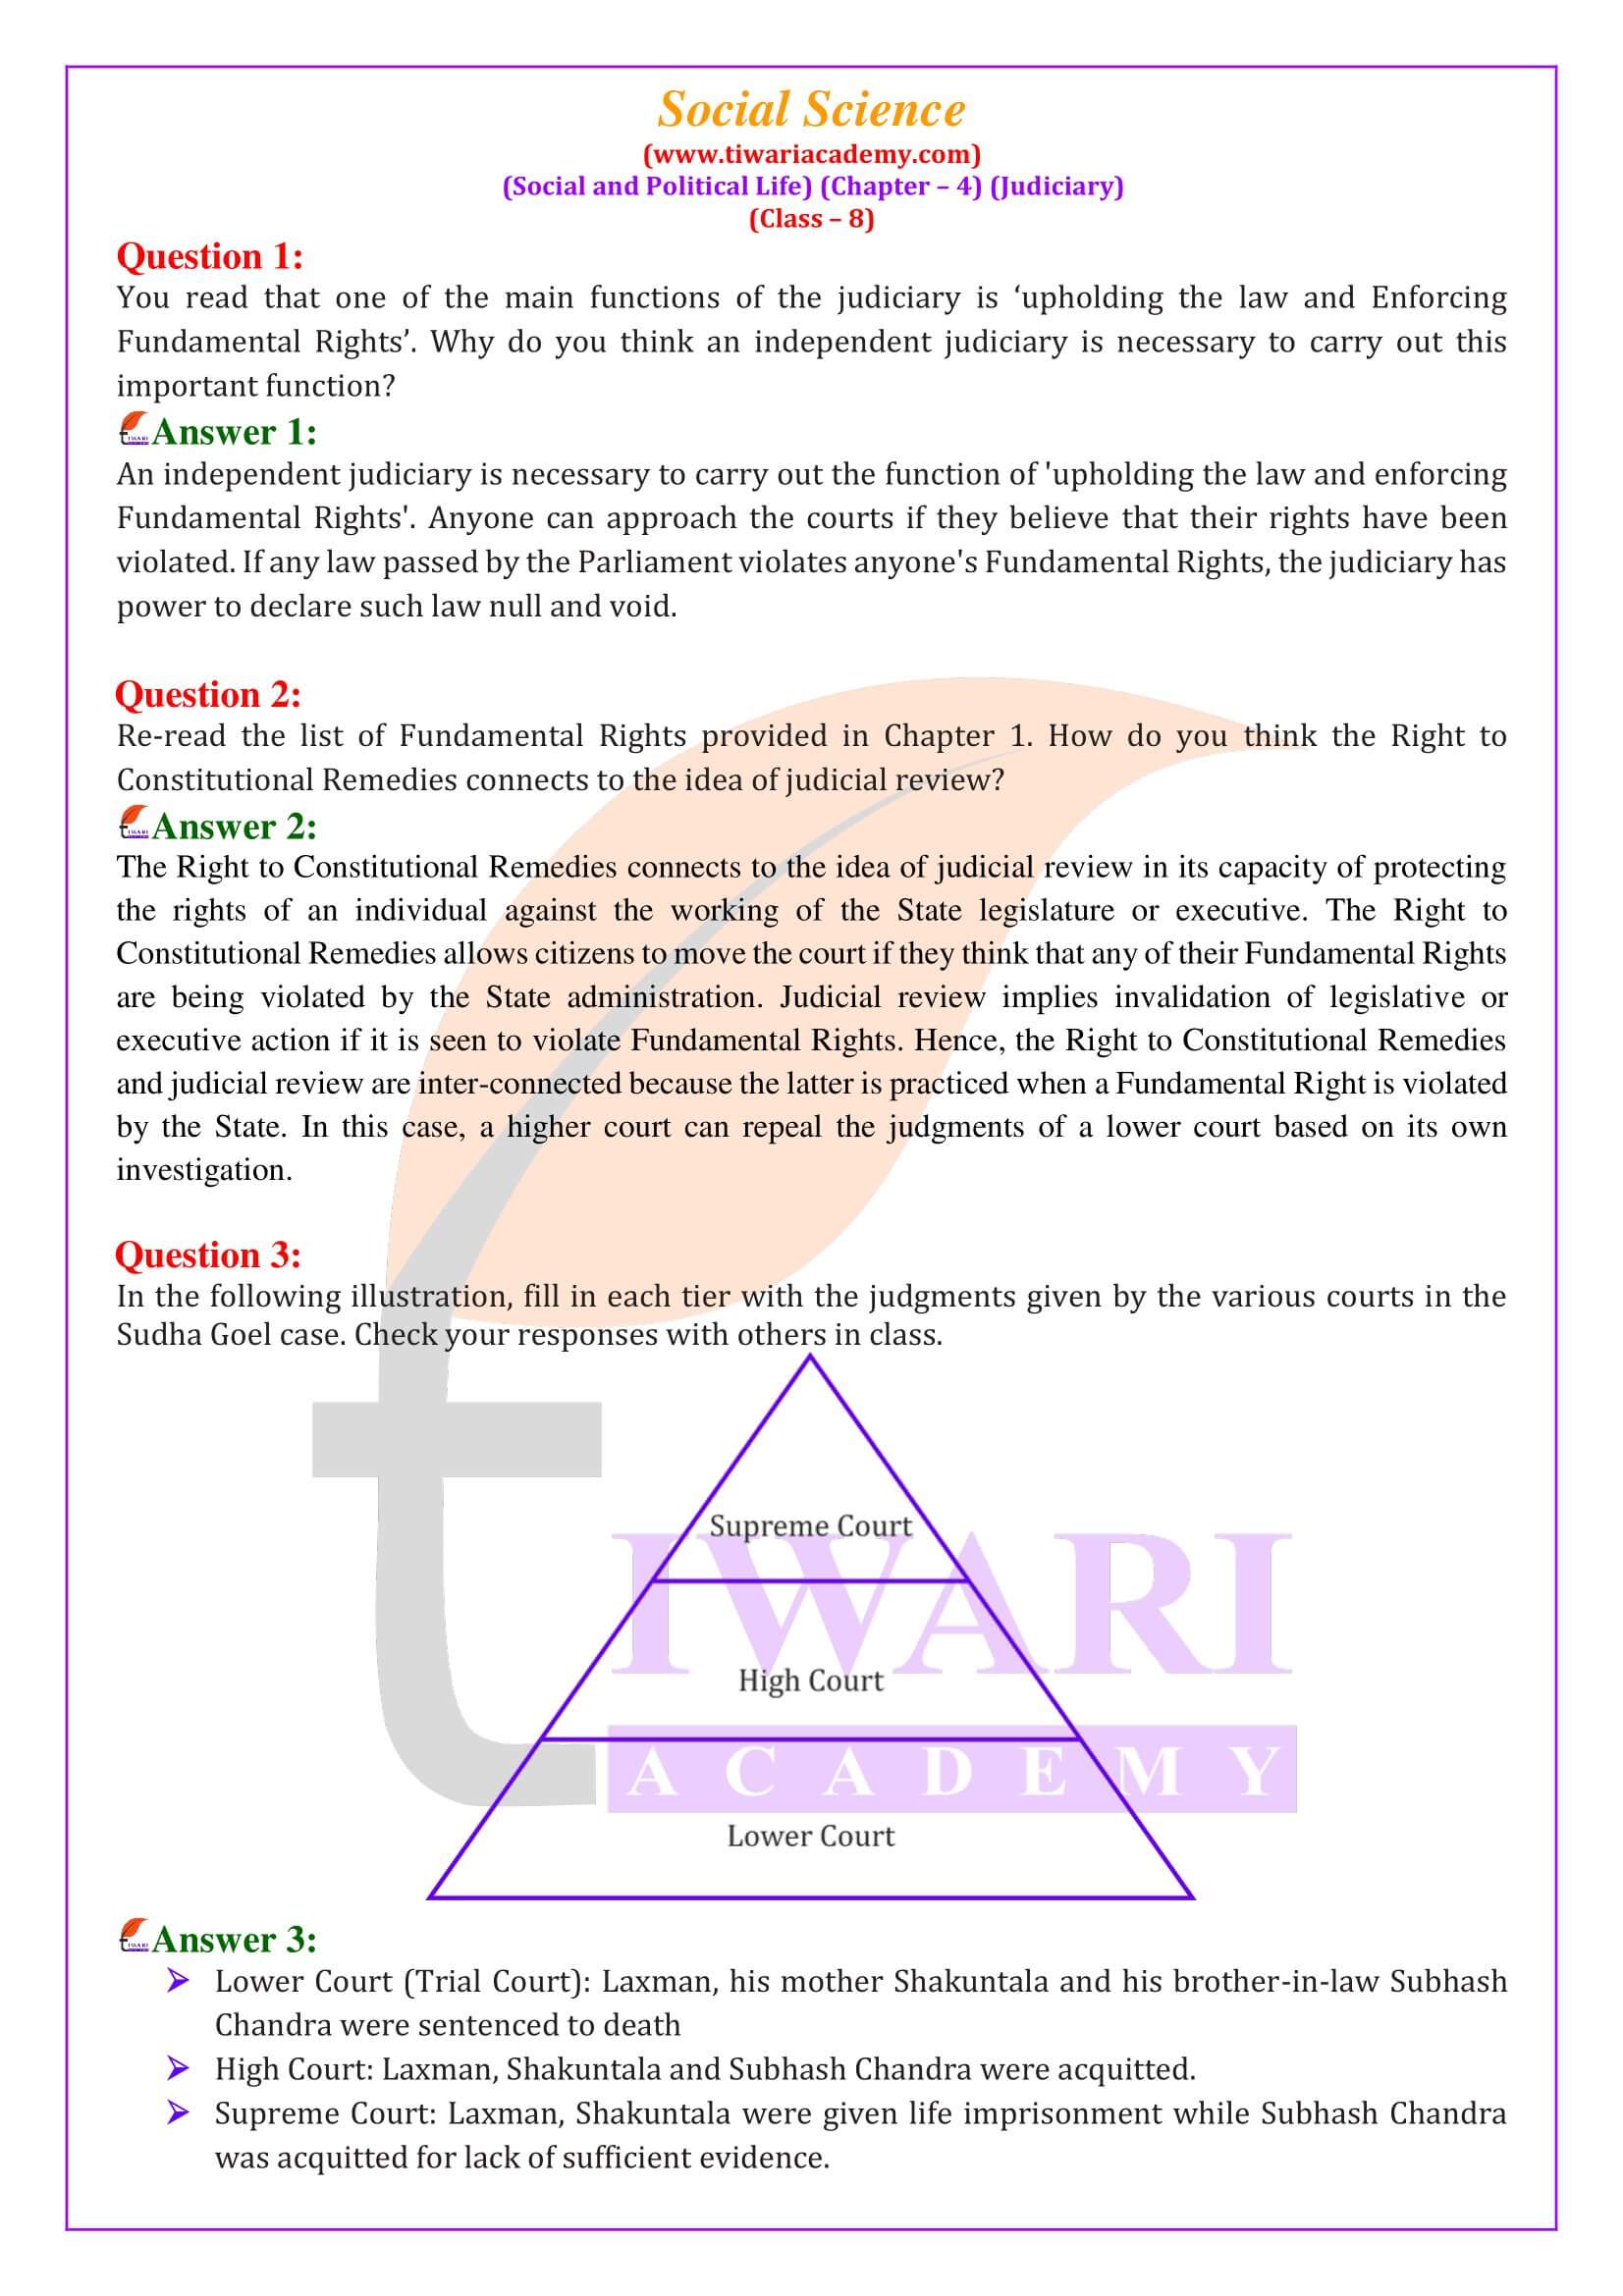 NCERT Solutions for Class 8 Social Science Civics Chapter 4 Judiciary